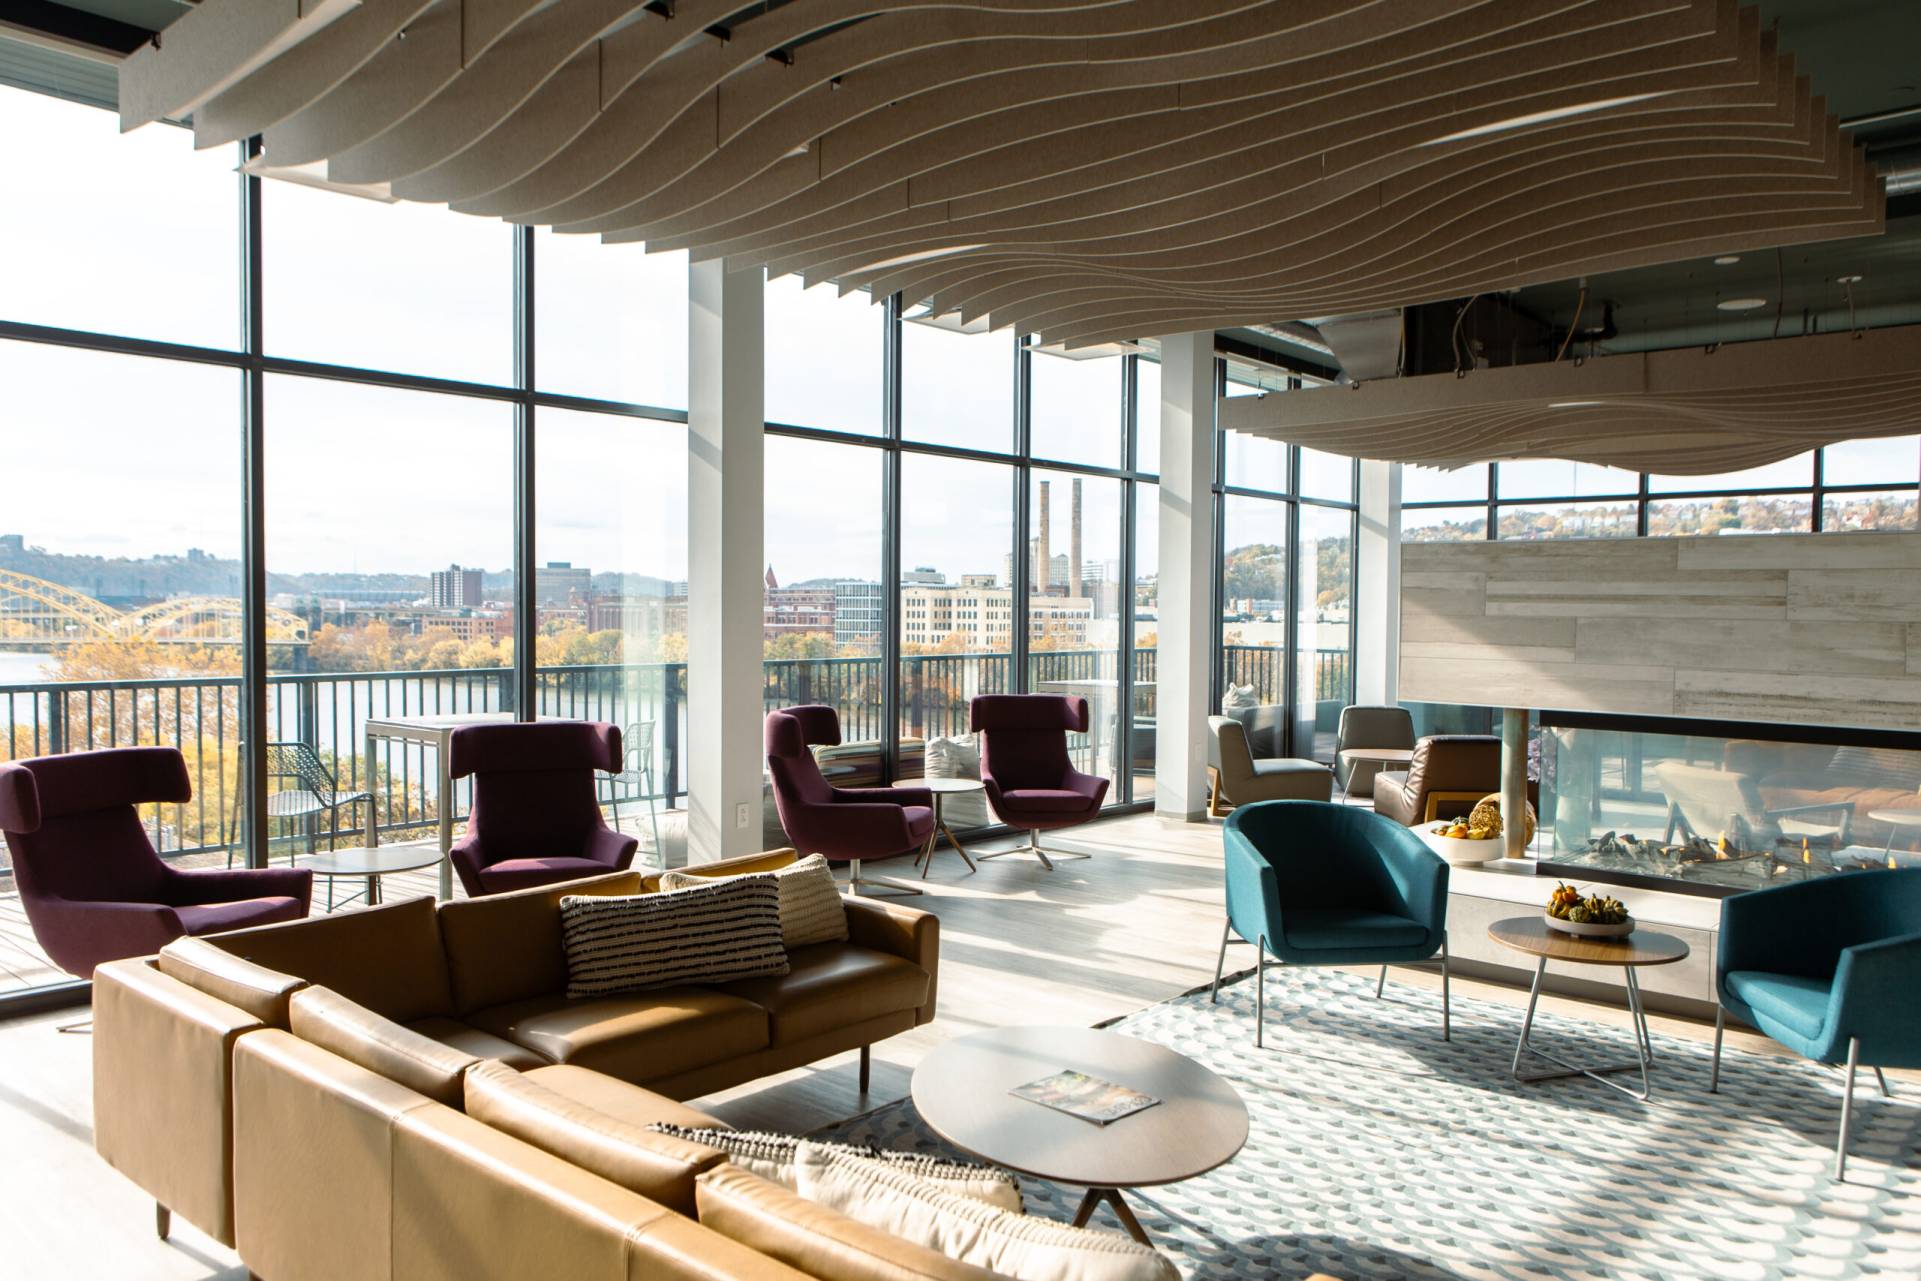 Club room featuring fireplace, couches, and view of downtown Pittsburgh